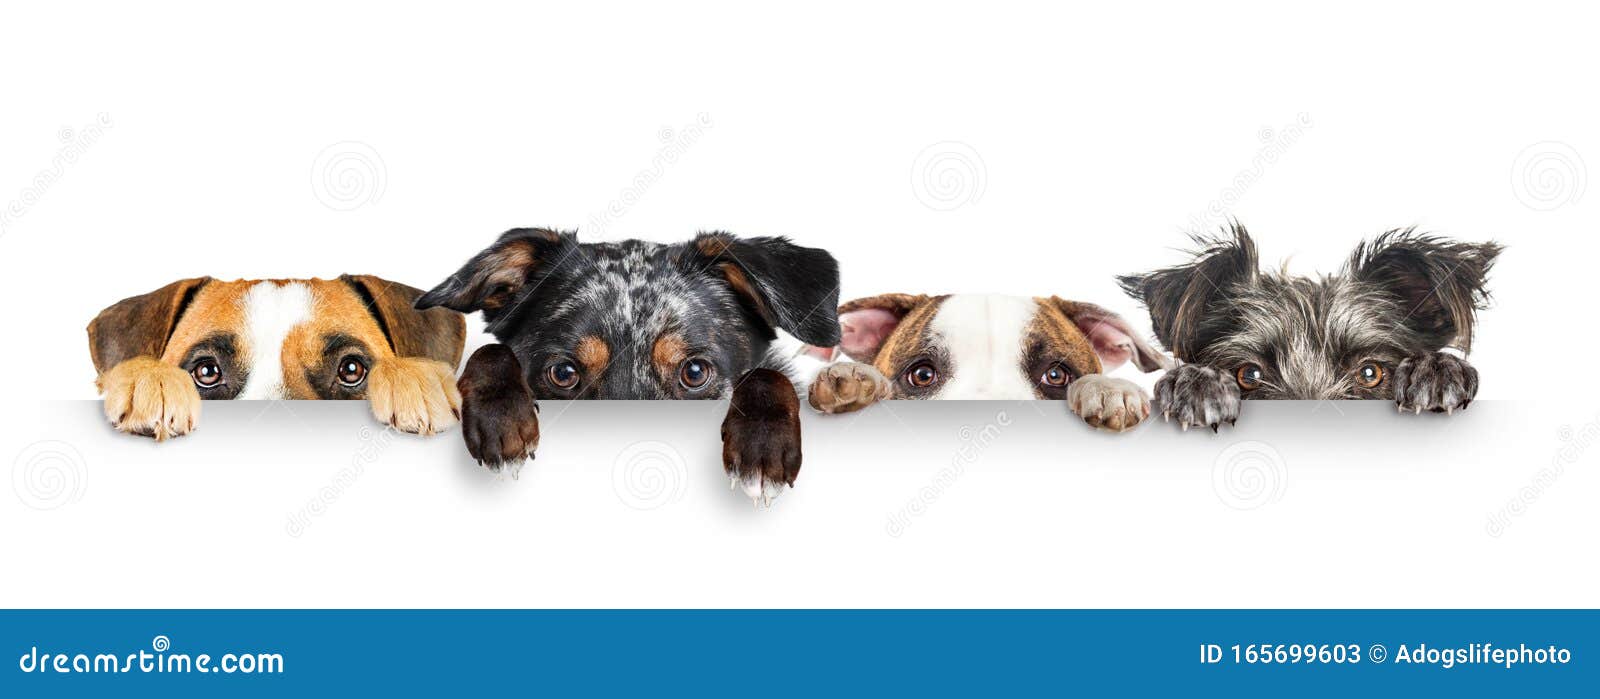 dogs peeking eyes and paws over white web banner